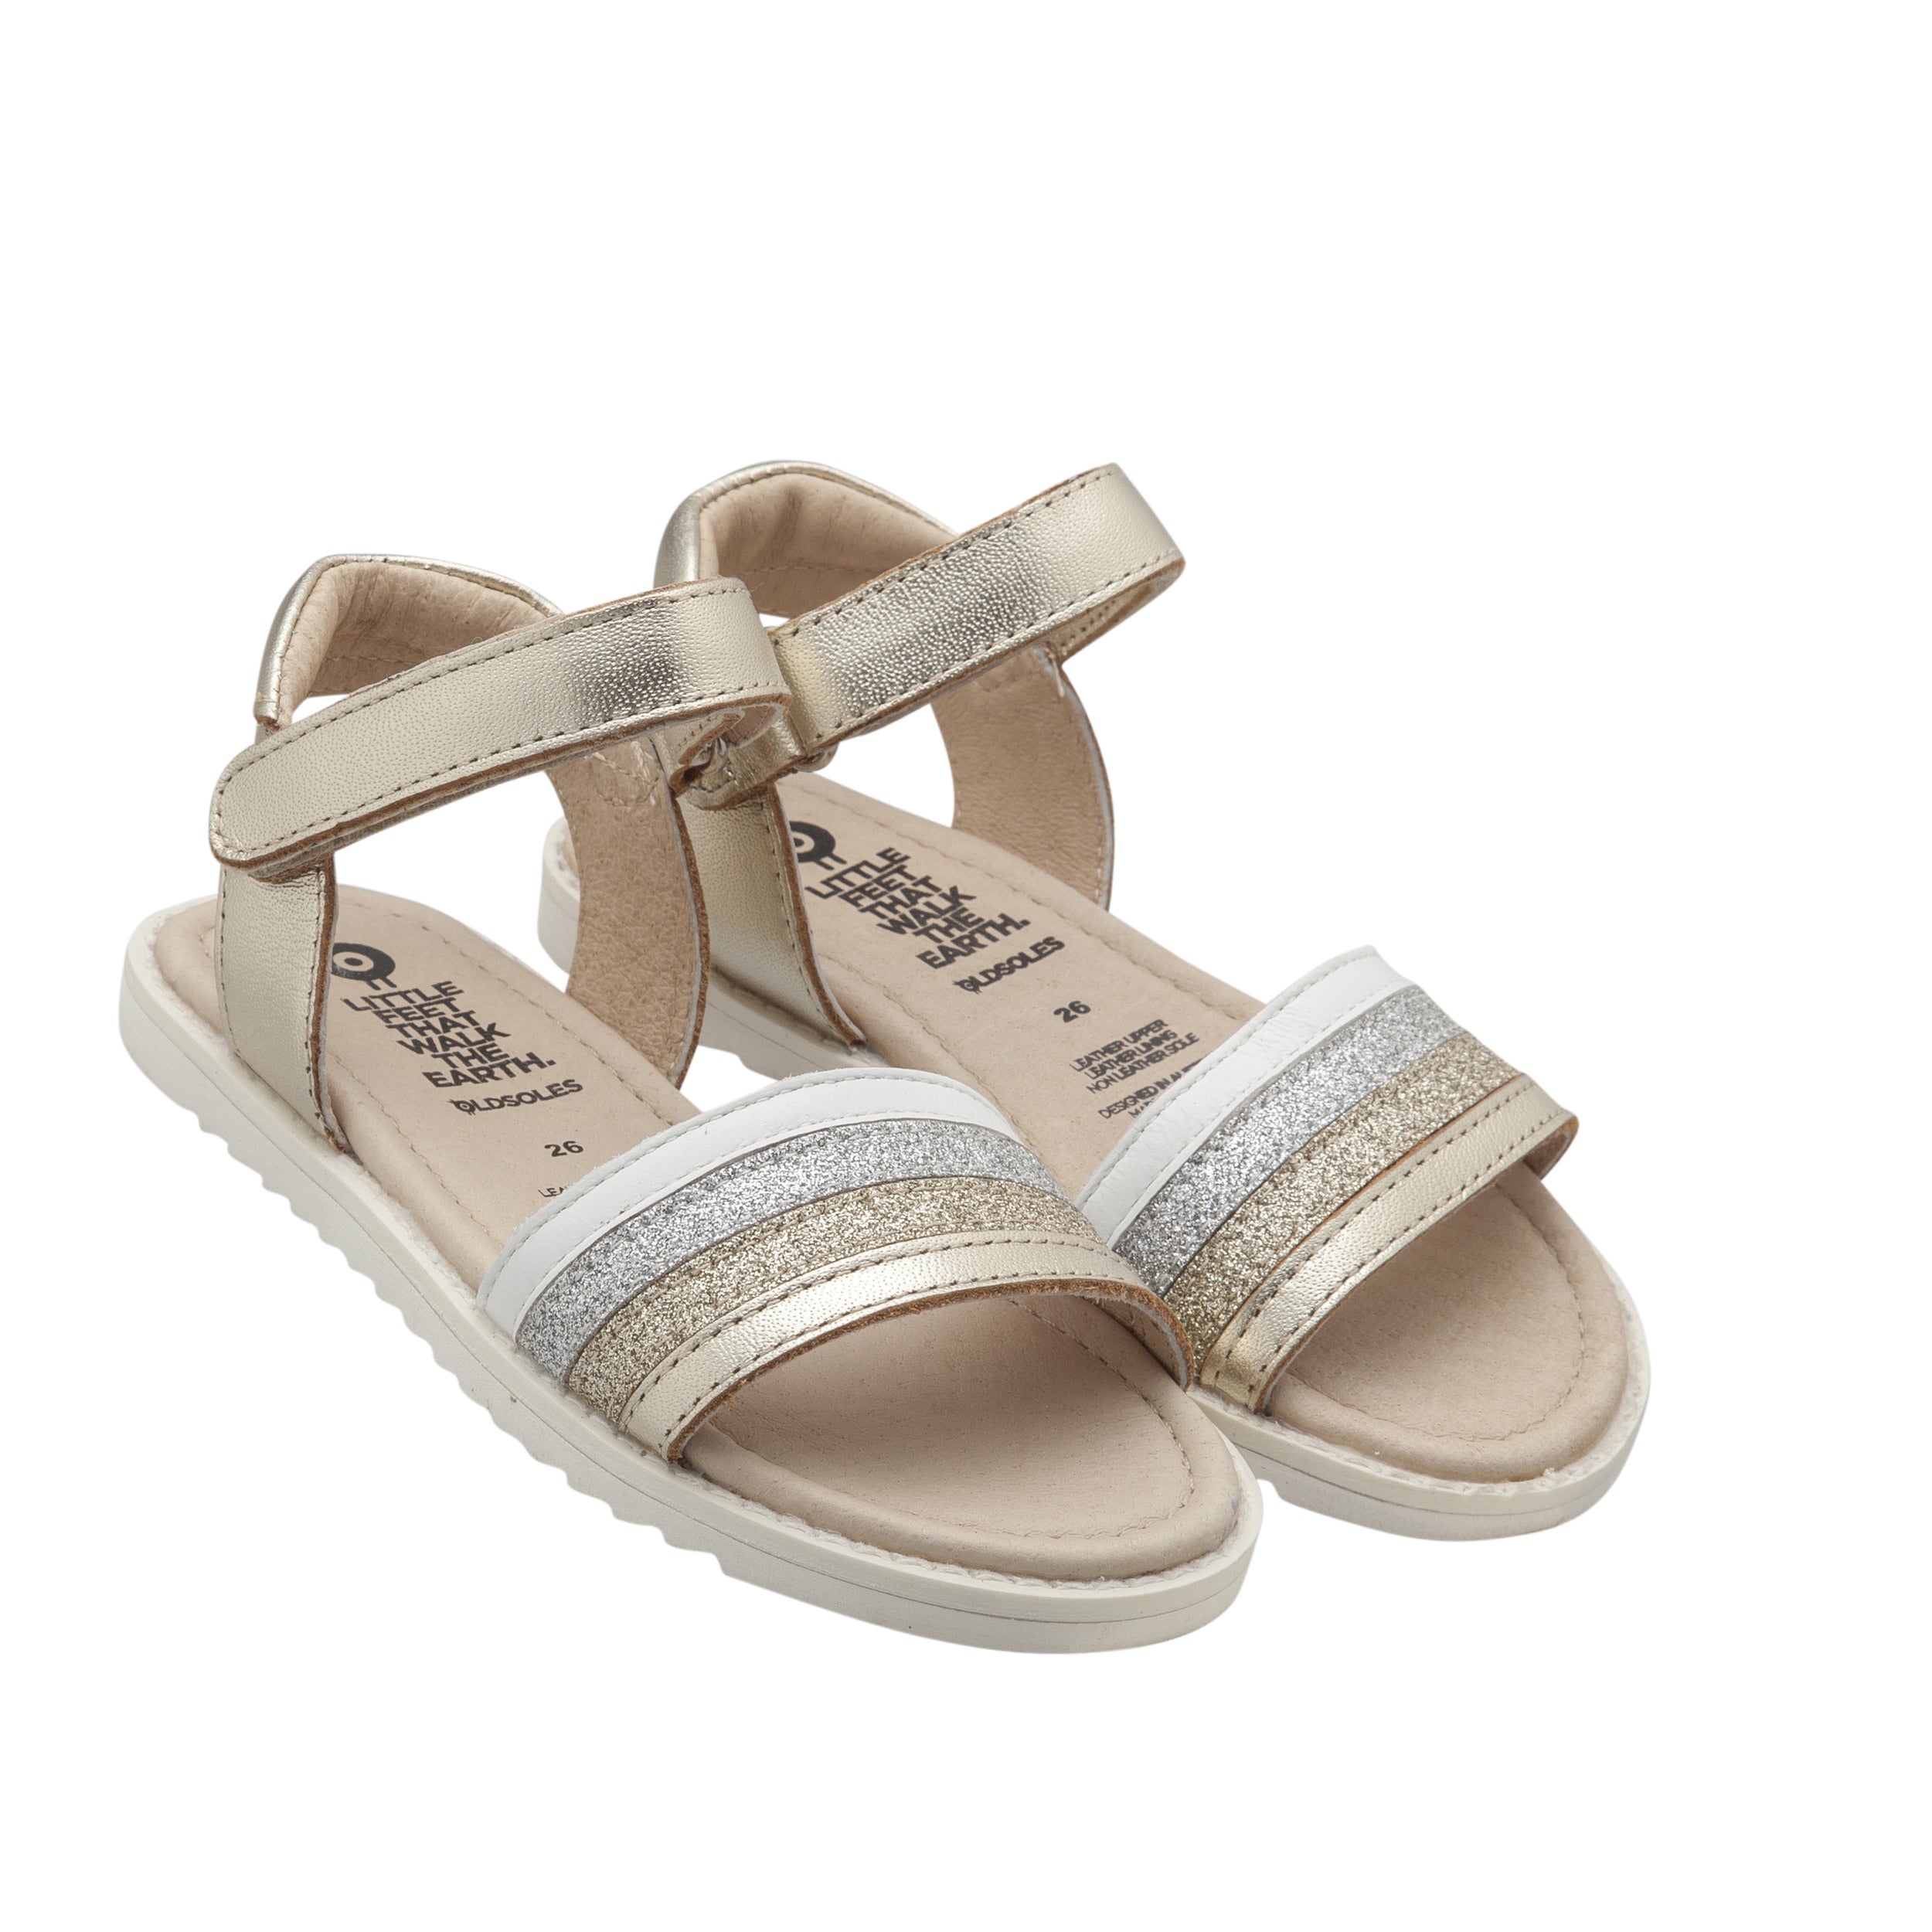 shop at Sticky Fingers Children's Boutique, Niddrie, Melbourne. Colour pop sandal in silver. Girls Sandals. Old Sole Shoes. 